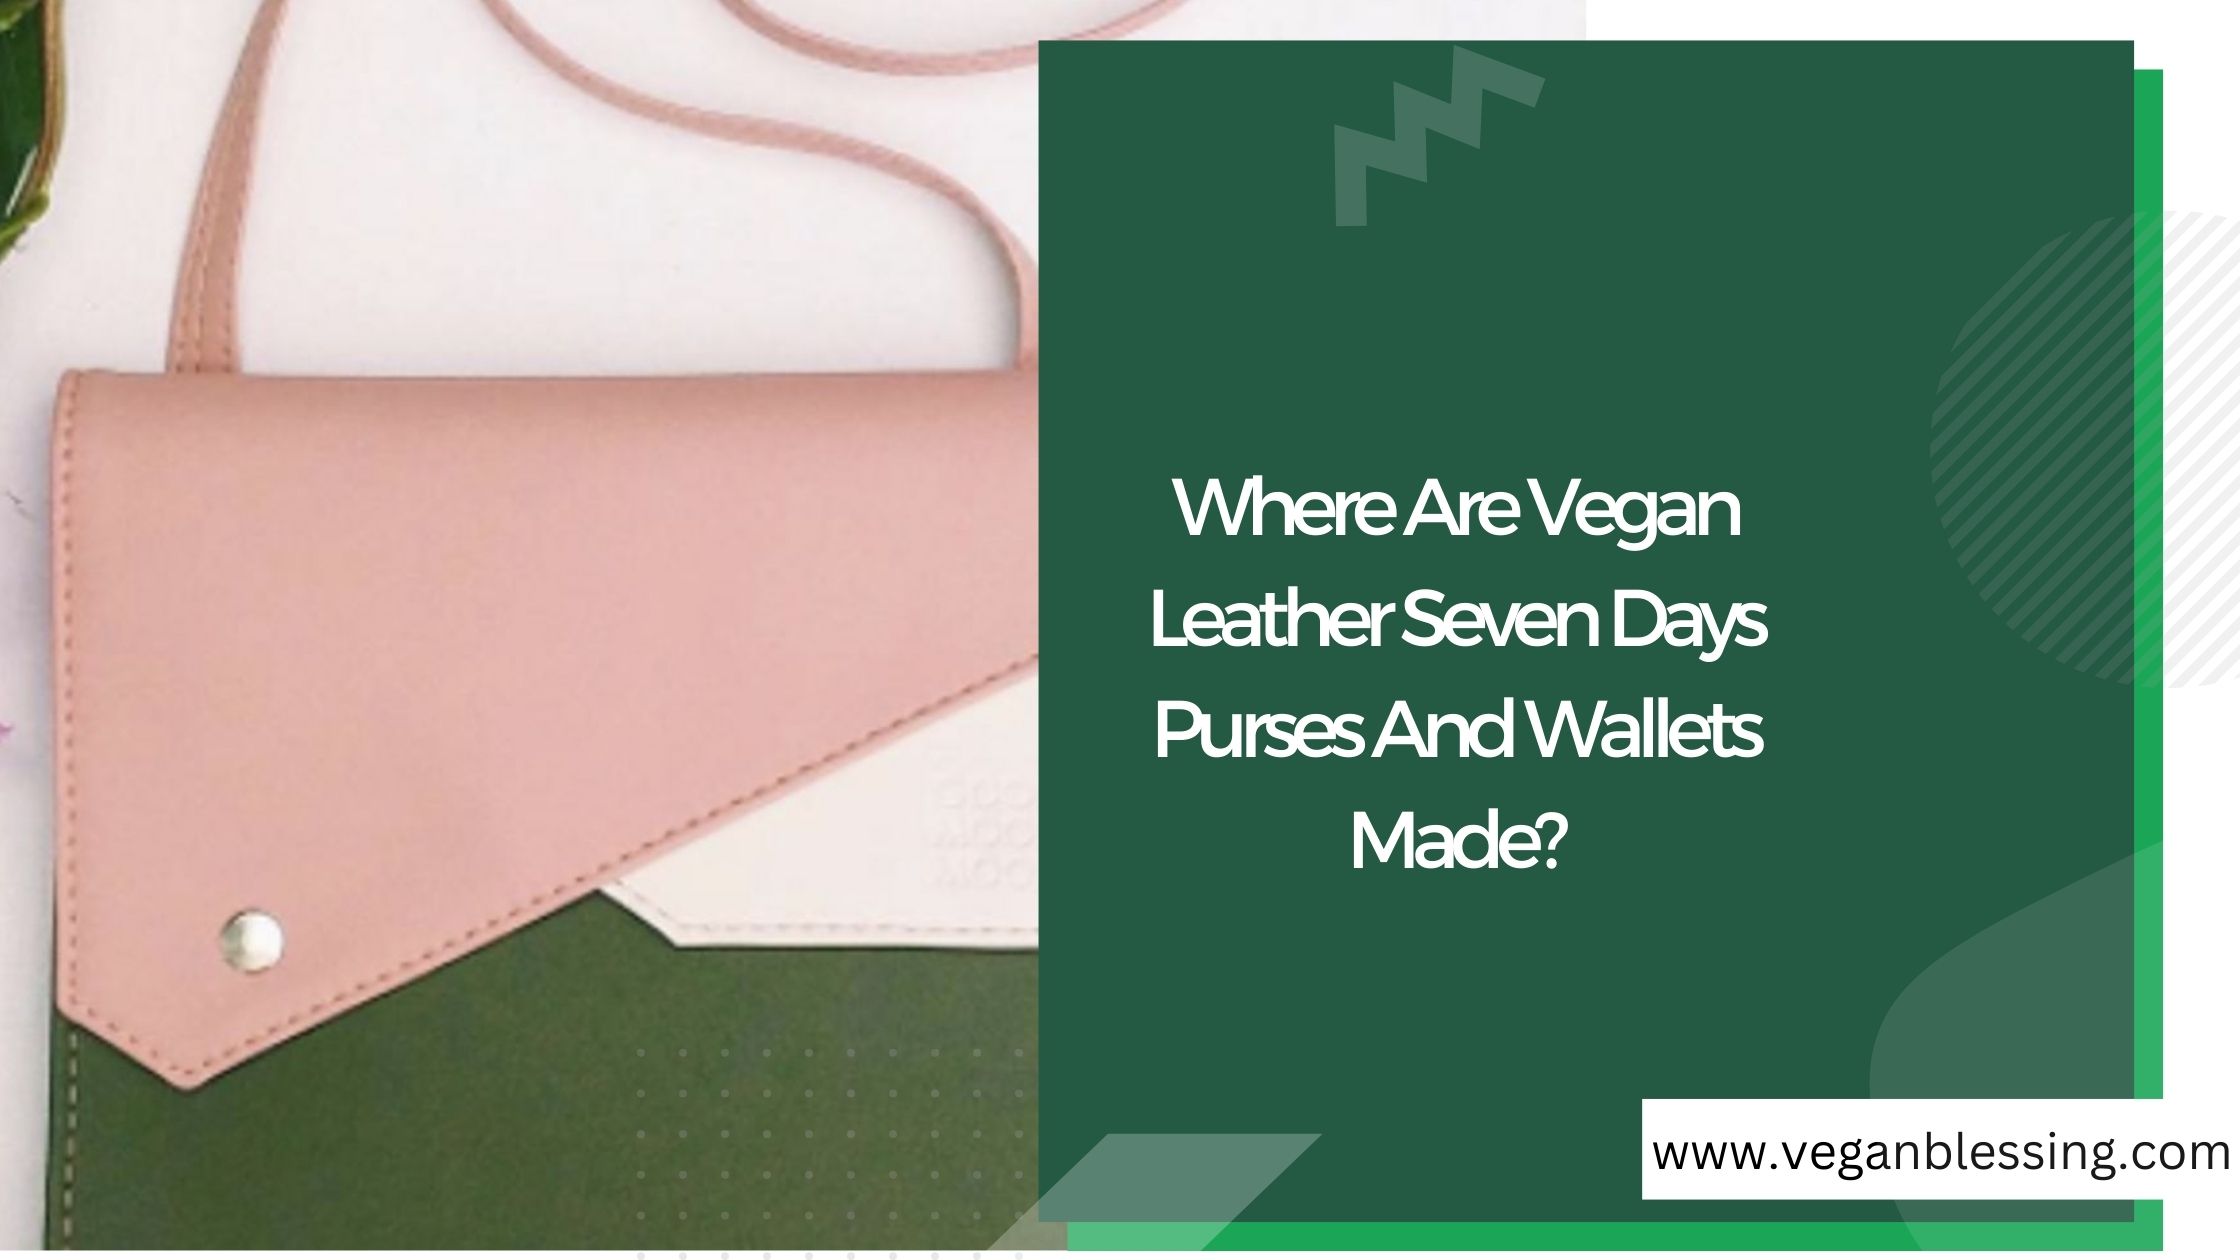 Where Are Vegan Leather Seven Days Purses And Wallets Made? Where Are Vegan Leather Seven Days Purses And Wallets Made